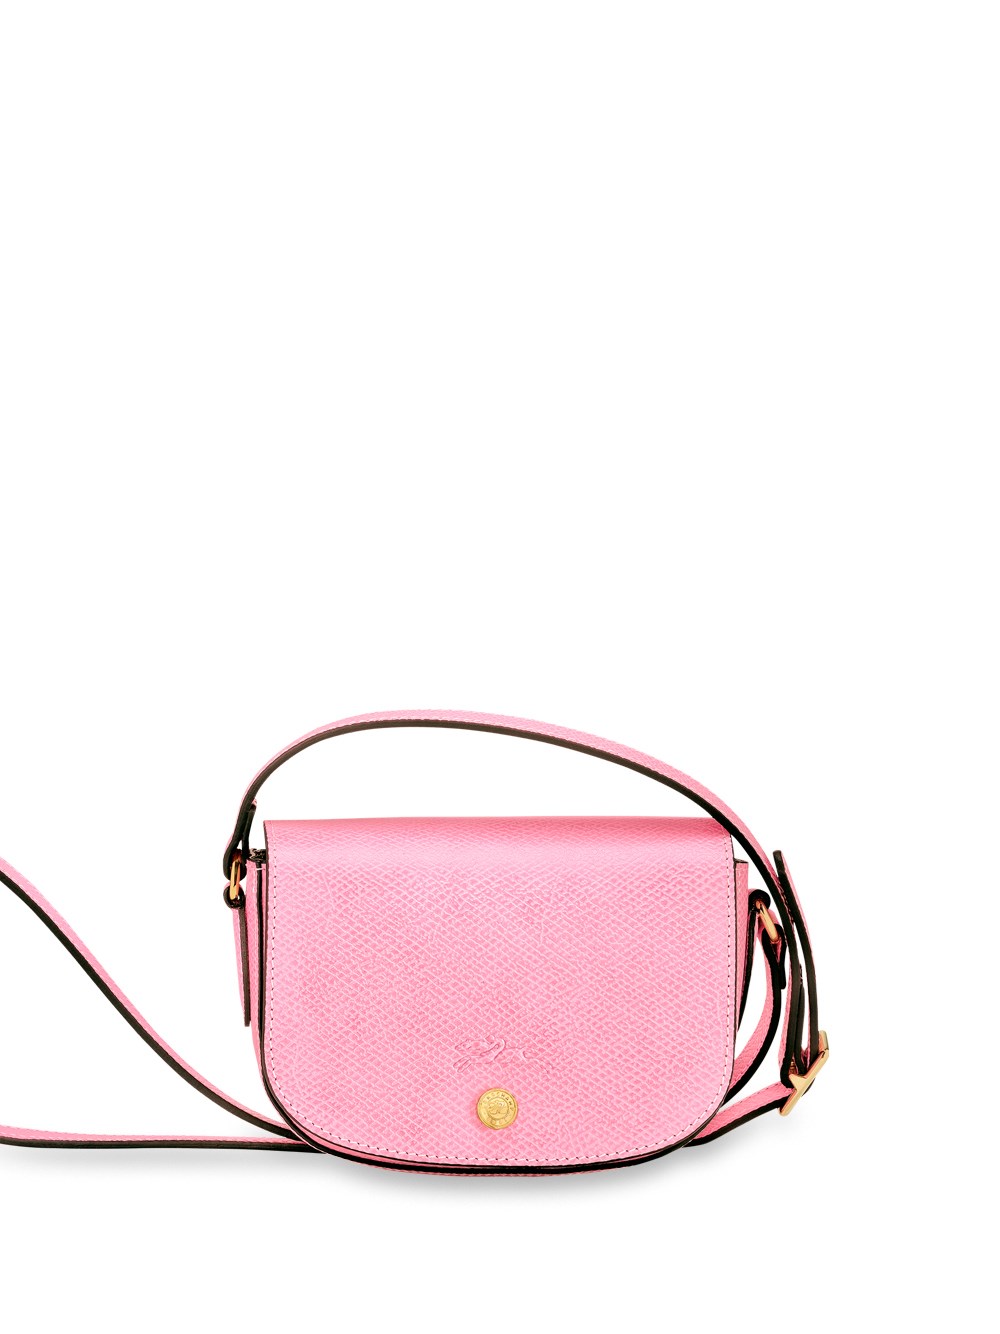 Longchamp `epure` Extra Small Crossbody Bag in Pink